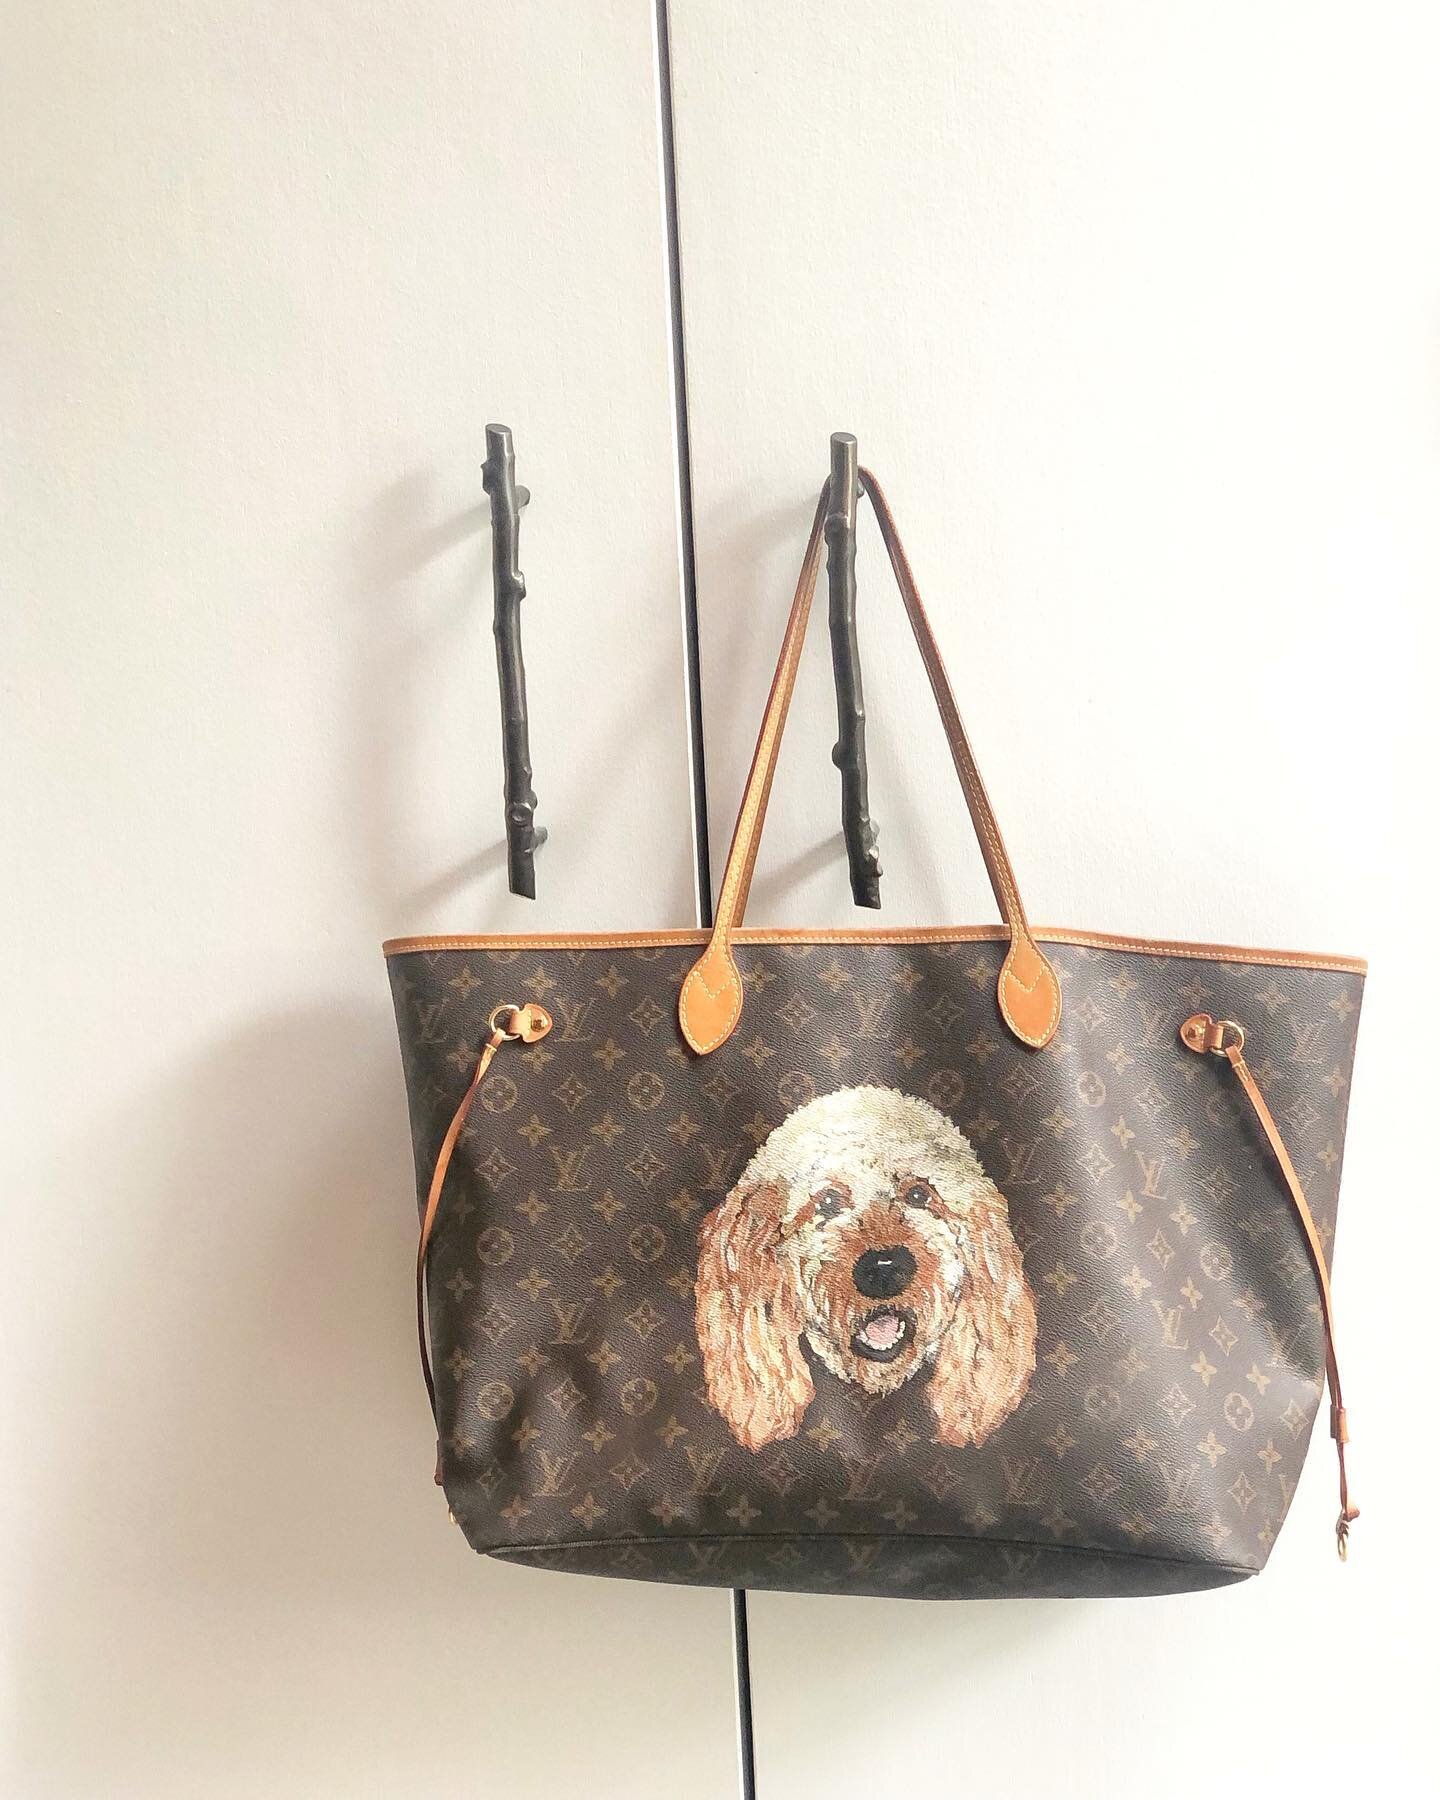 Up-cycling isn&rsquo;t a trend, it&rsquo;s a way of life. #P&ecirc;t&agrave;Portrait 🐶 Discover via link in bio.

#goldendudeleathers #dogsofinstagram #doodlesofinstagram #goyard #handpainted #madeinnyc #doglover #nyc #sustainableart #personalizatio